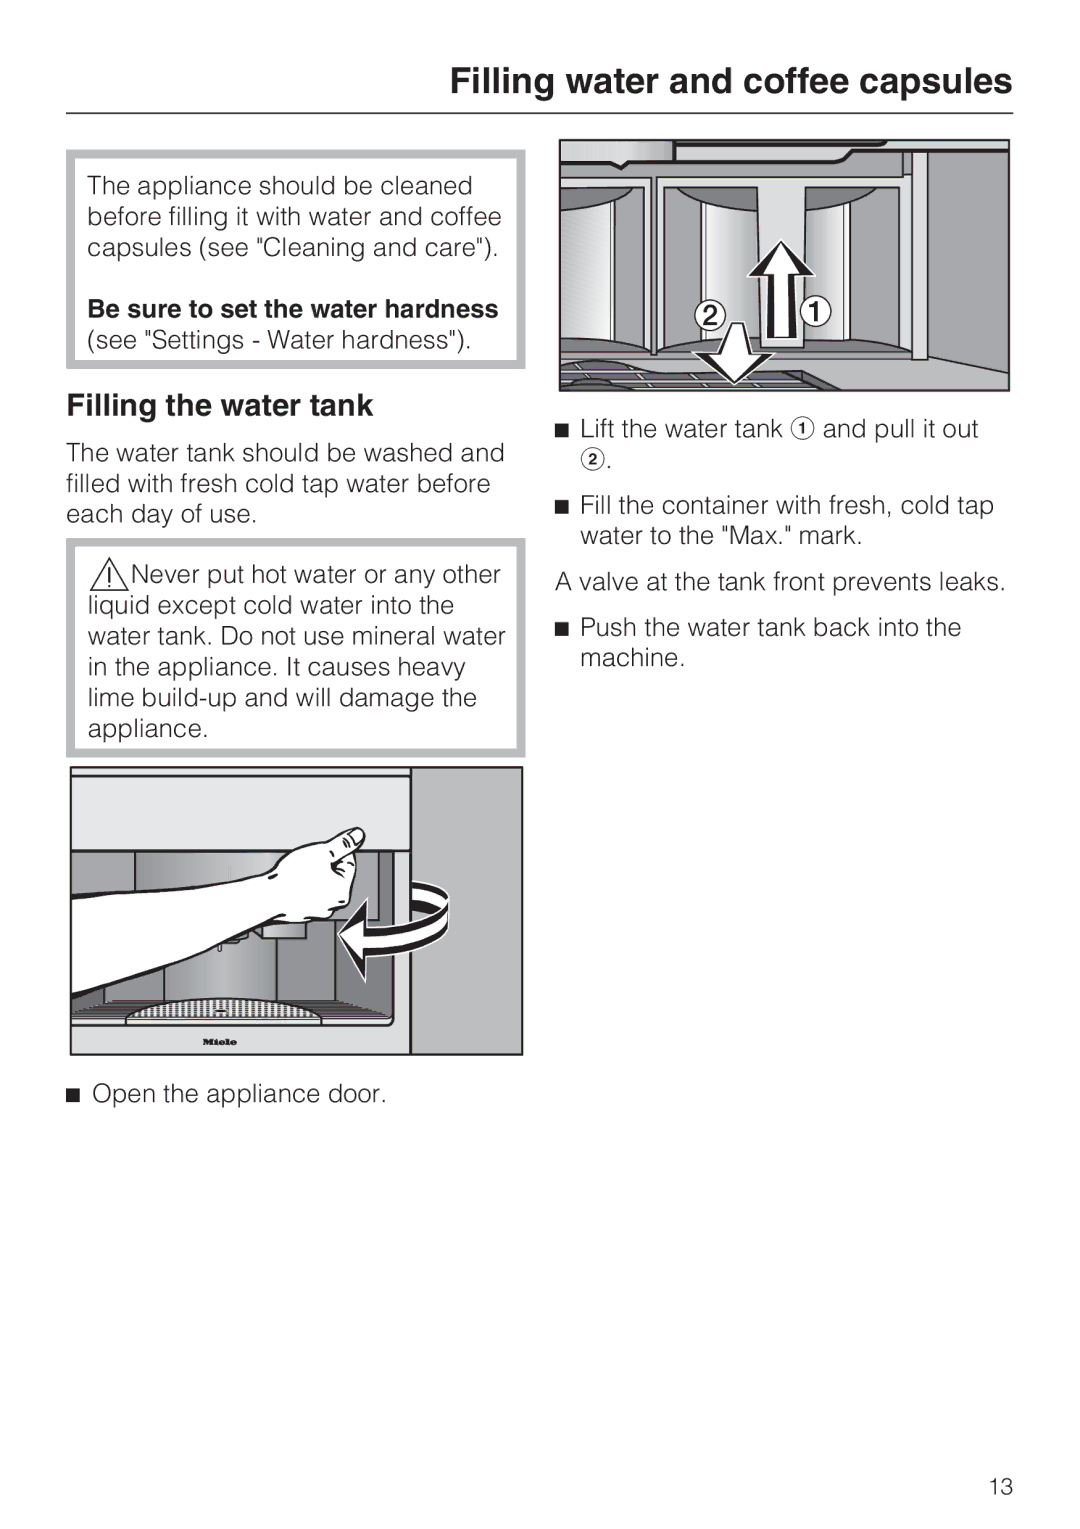 Miele CVA 2662 installation instructions Filling water and coffee capsules, Filling the water tank, Open the appliance door 